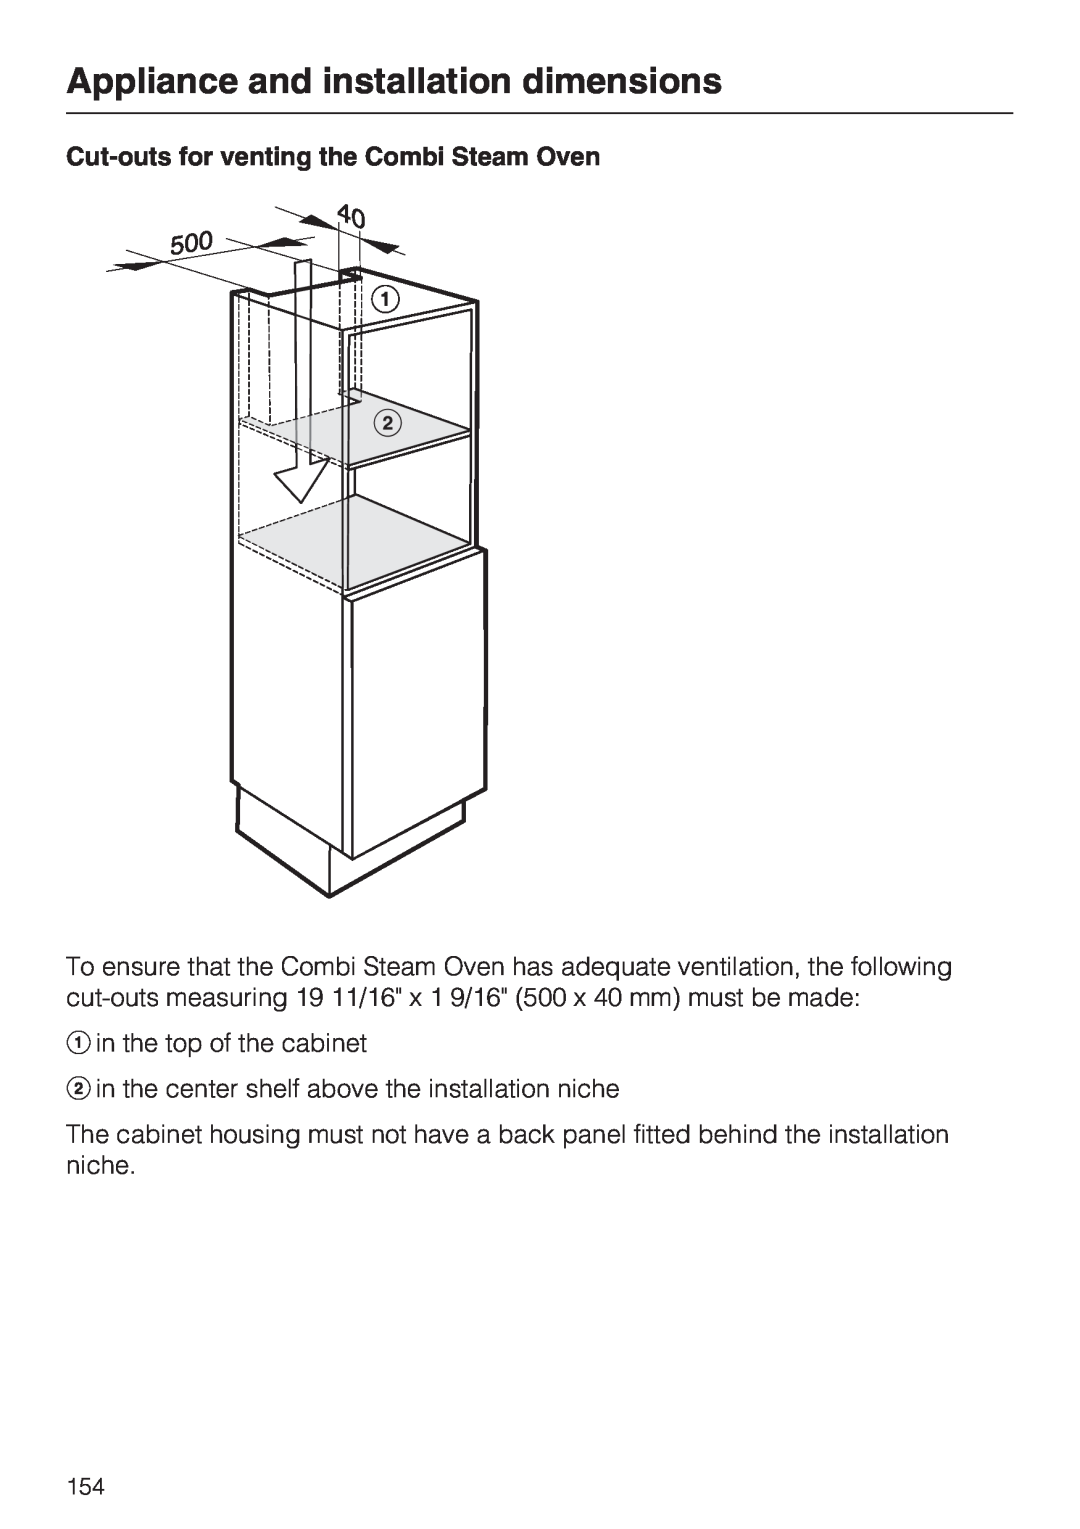 Miele 09 855 050 installation instructions Appliance and installation dimensions, Cut-outsfor venting the Combi Steam Oven 